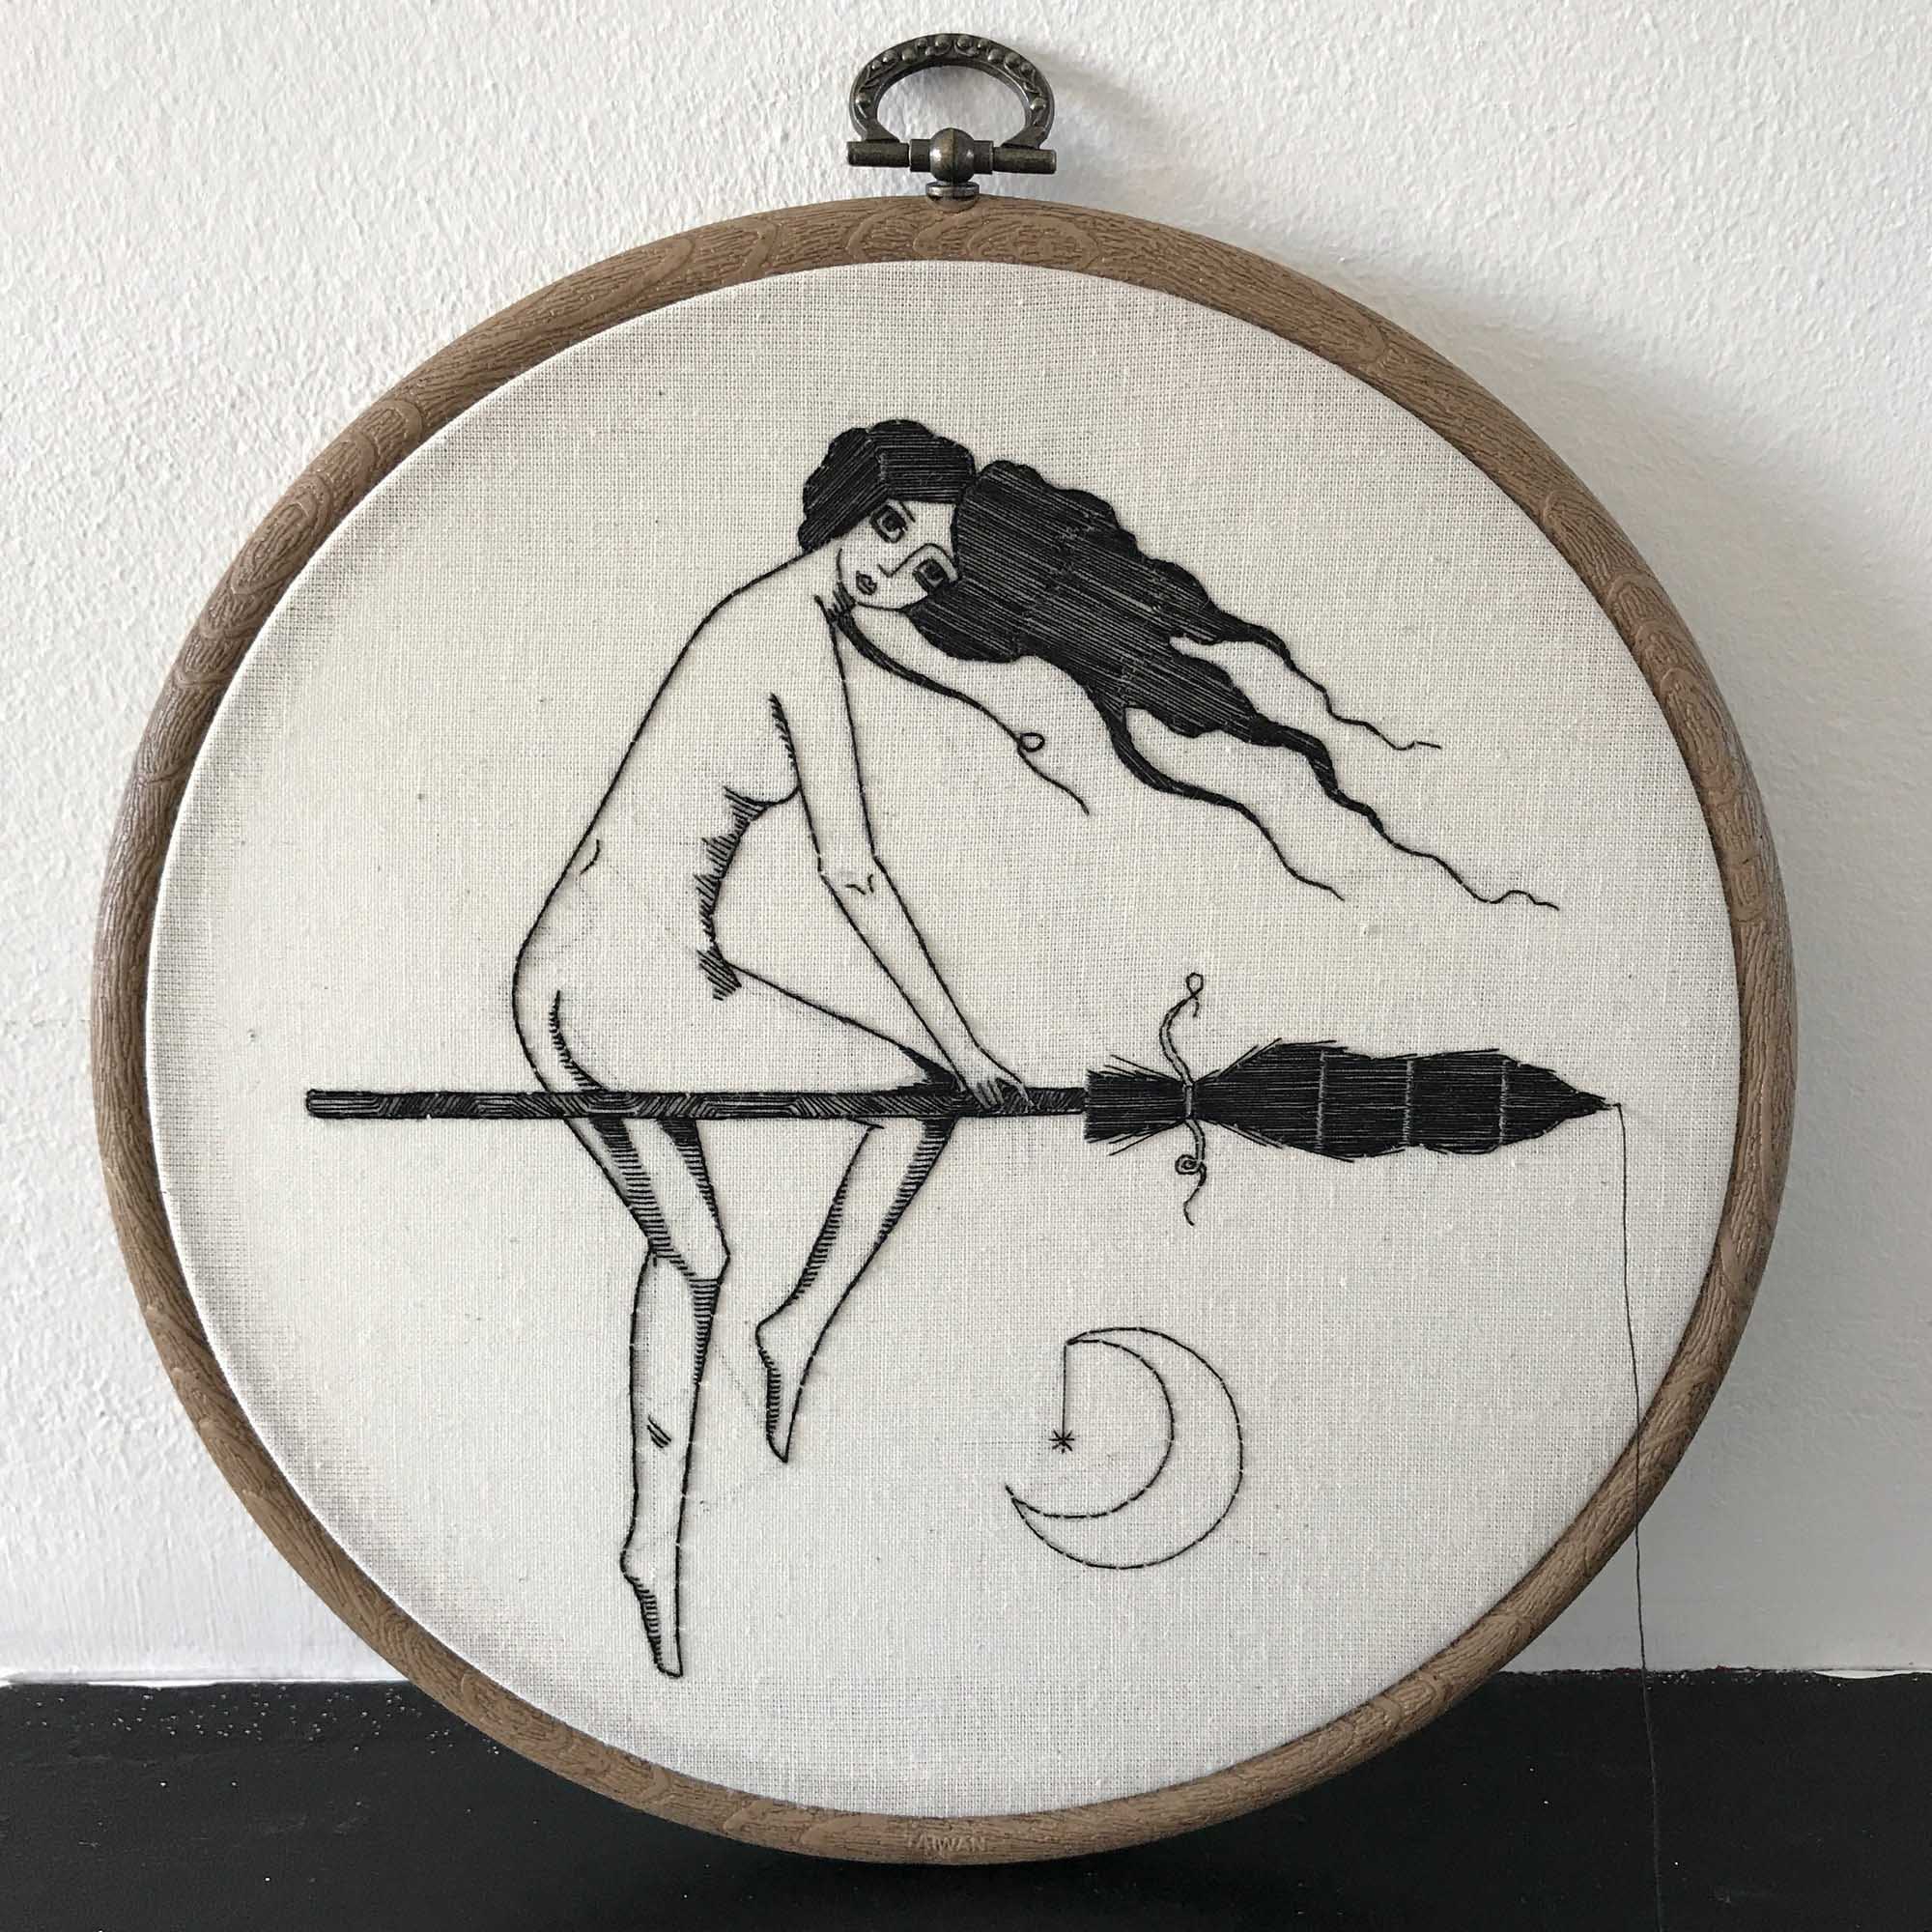 Embroidery of a woman riding on a broomstick